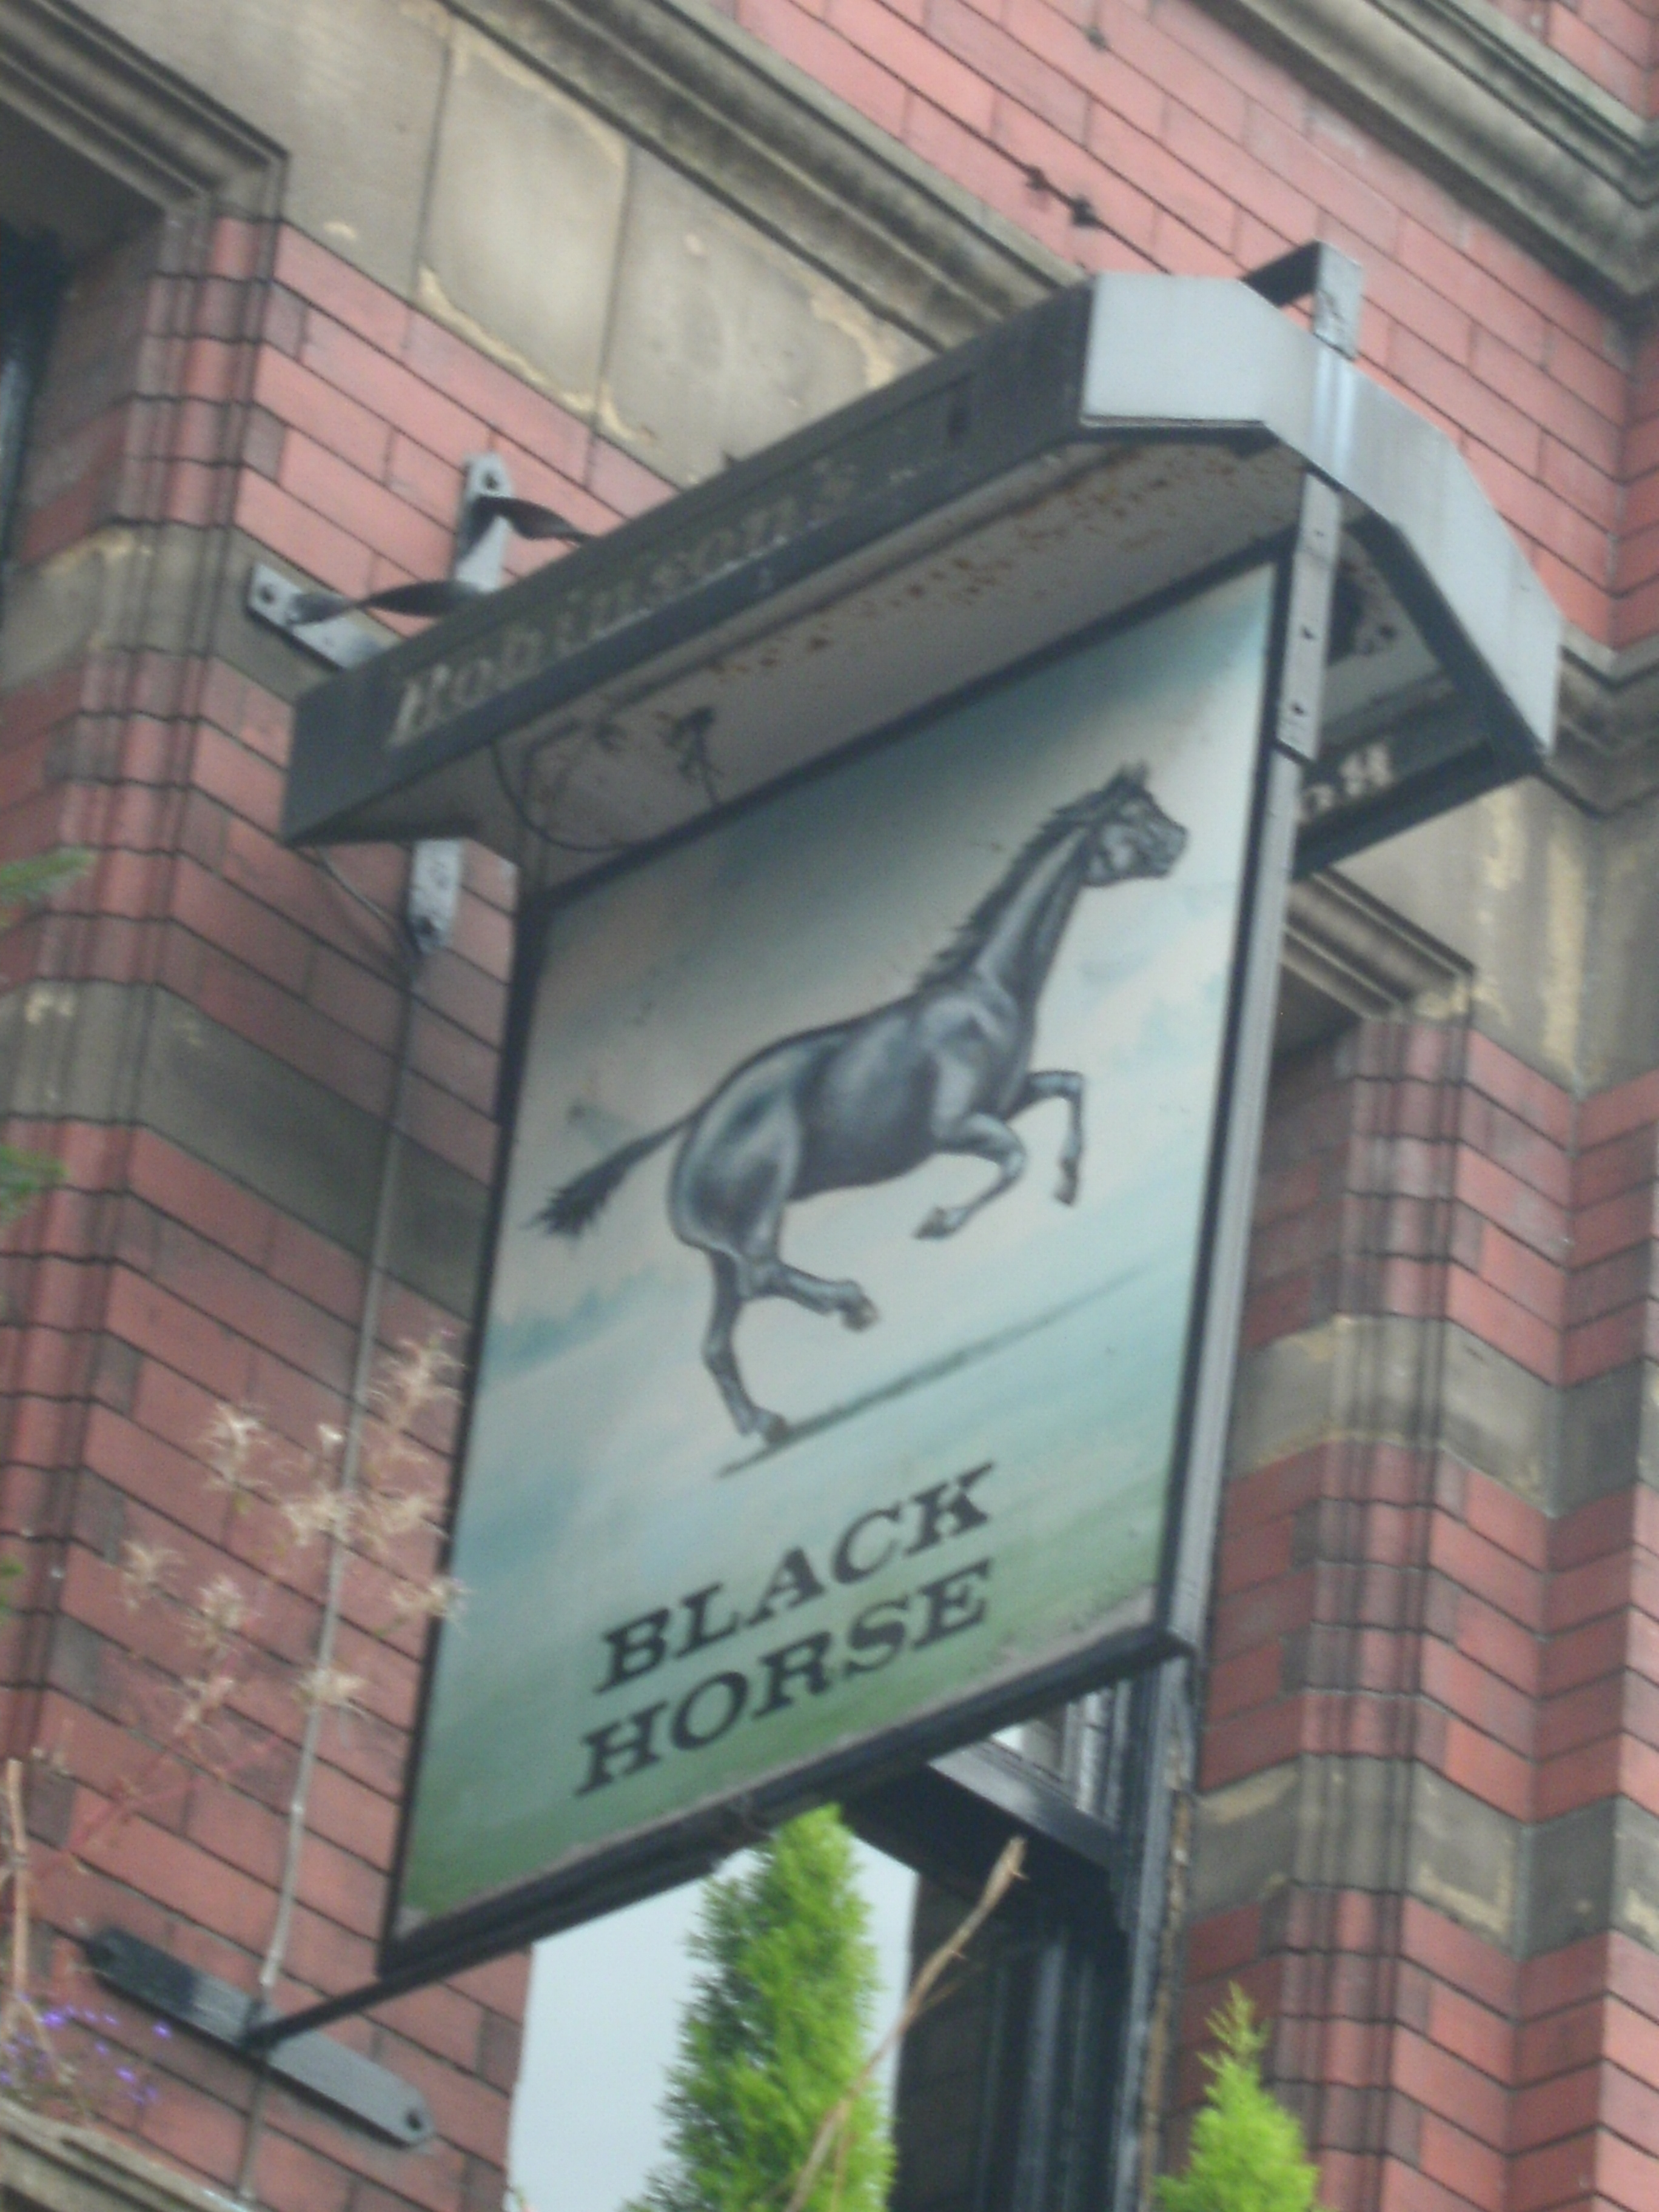 Photo taken by me – The Black Horse pub sign 